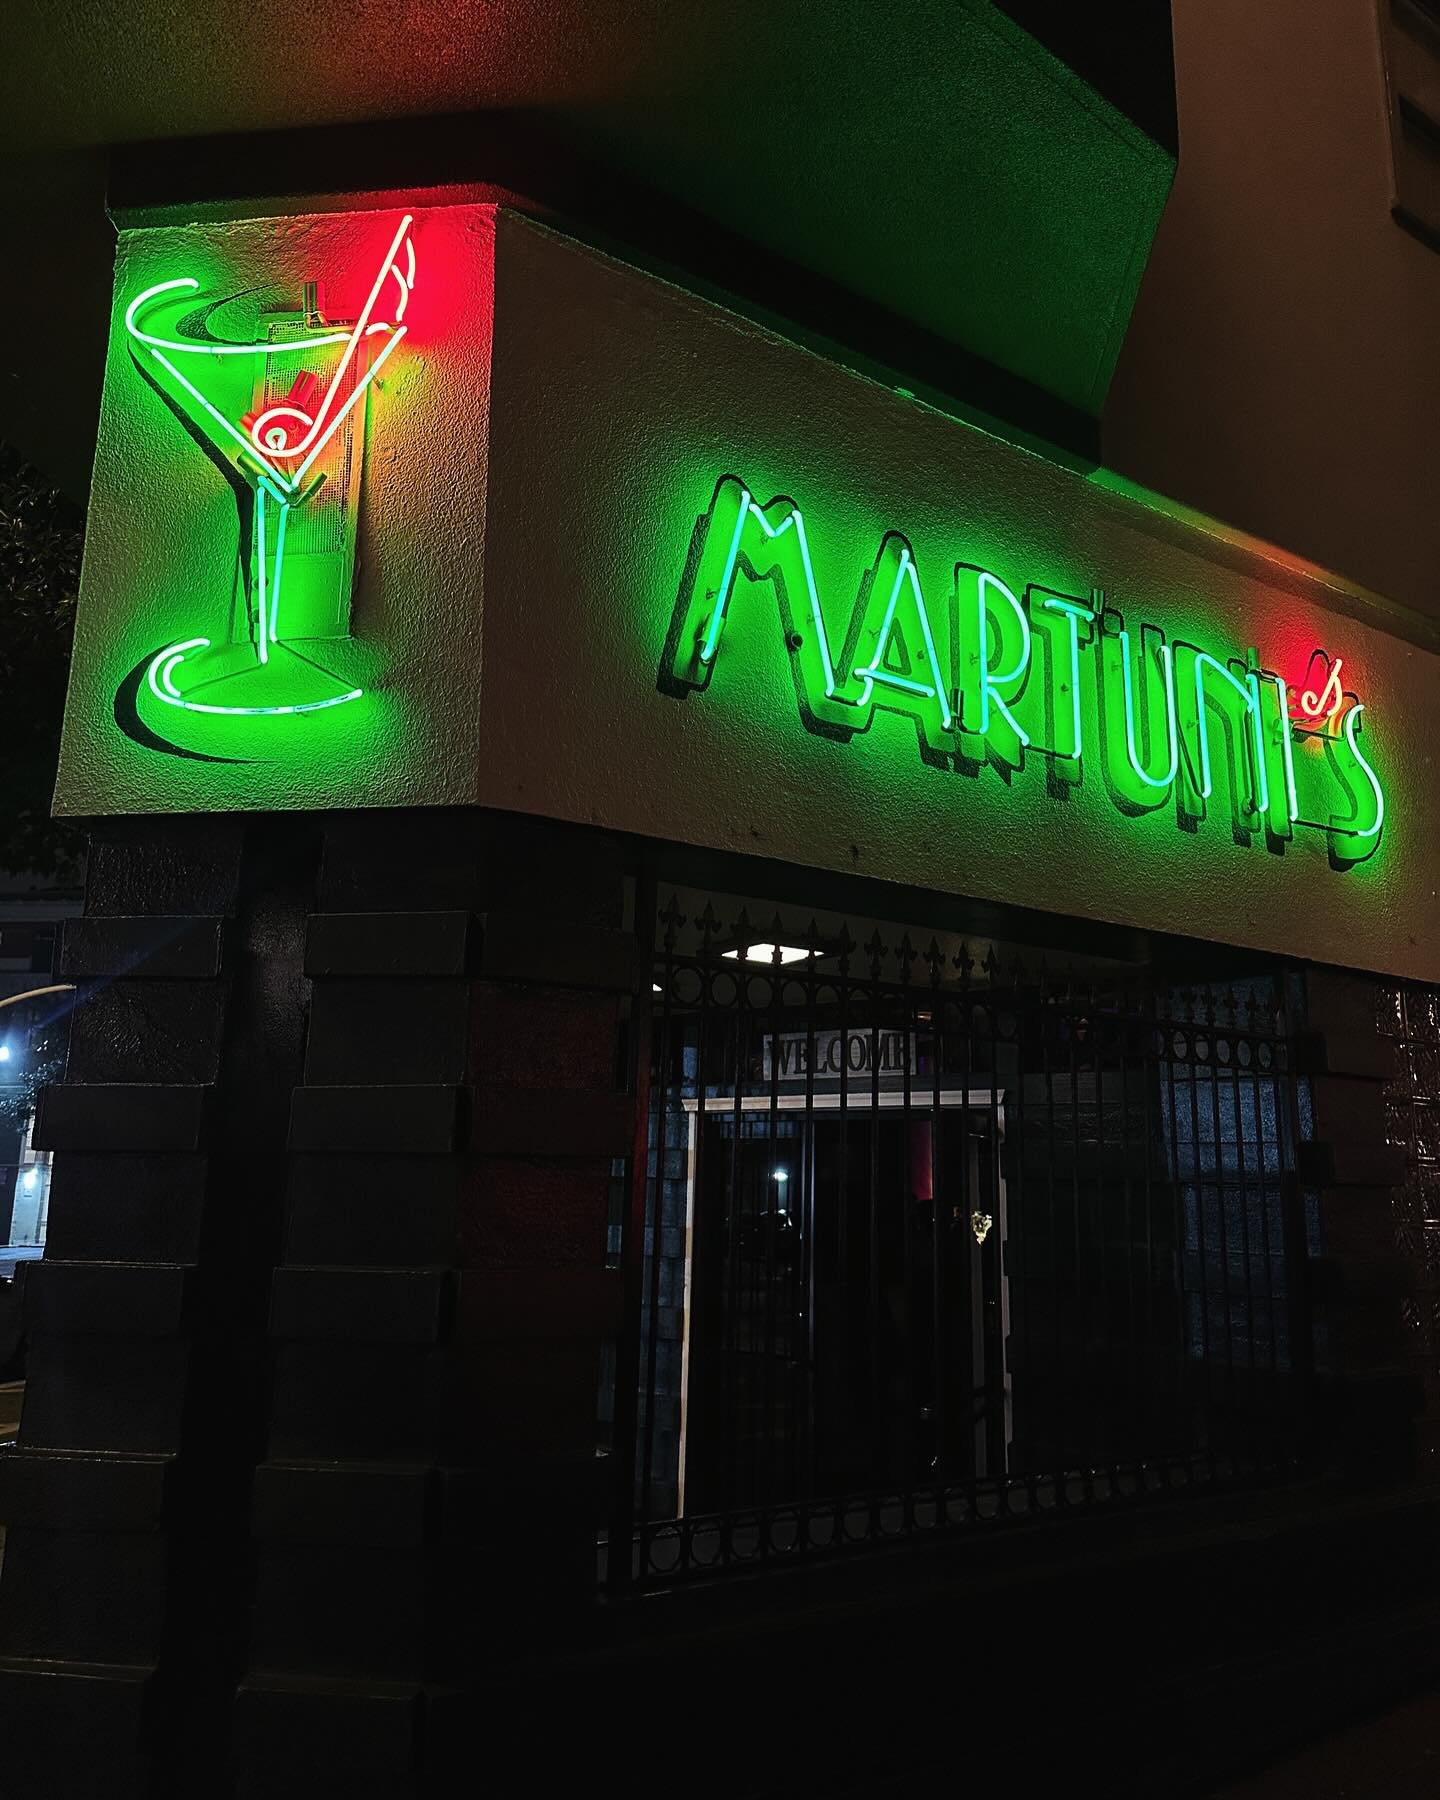 I think I found my new favorite bar! I can&rsquo;t believe that it&rsquo;s taken me 15 years to check out Martunis! The one true piano bar in the heart of SF serving some of the best martinis around! I&rsquo;m not a big martini person so I was drinki